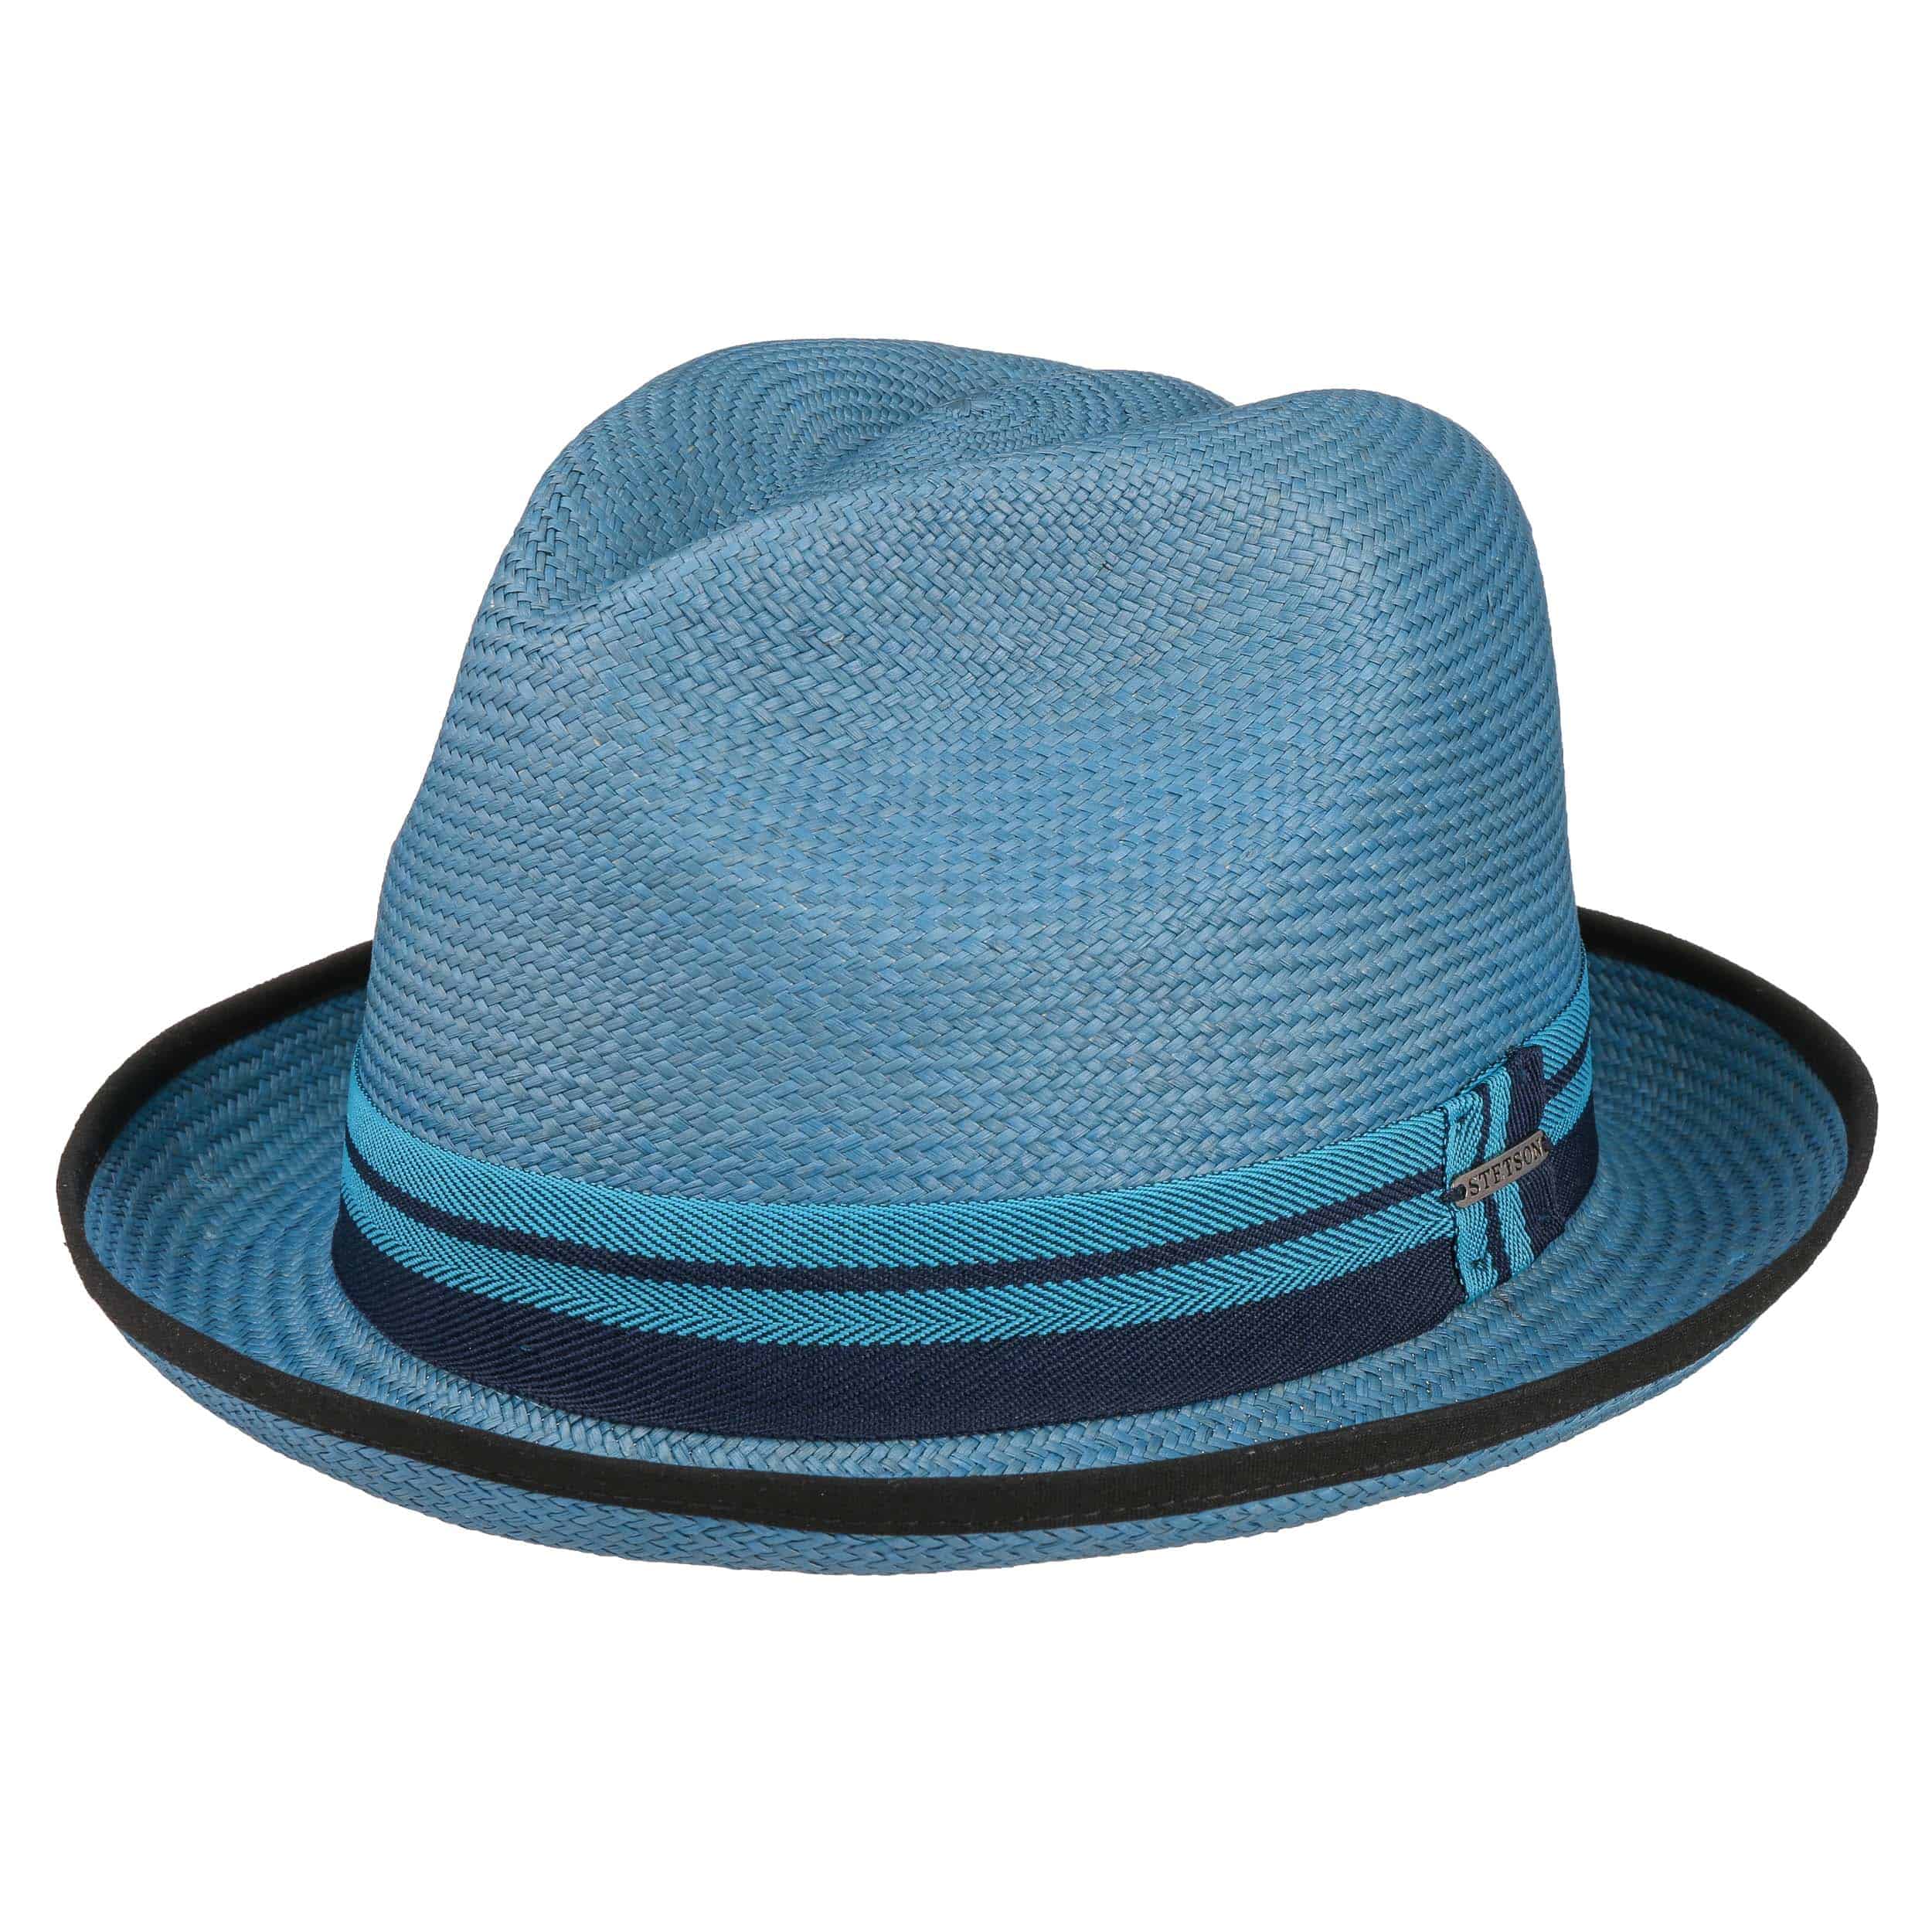 Neples Trilby Panama Hat by Stetson - 129,00